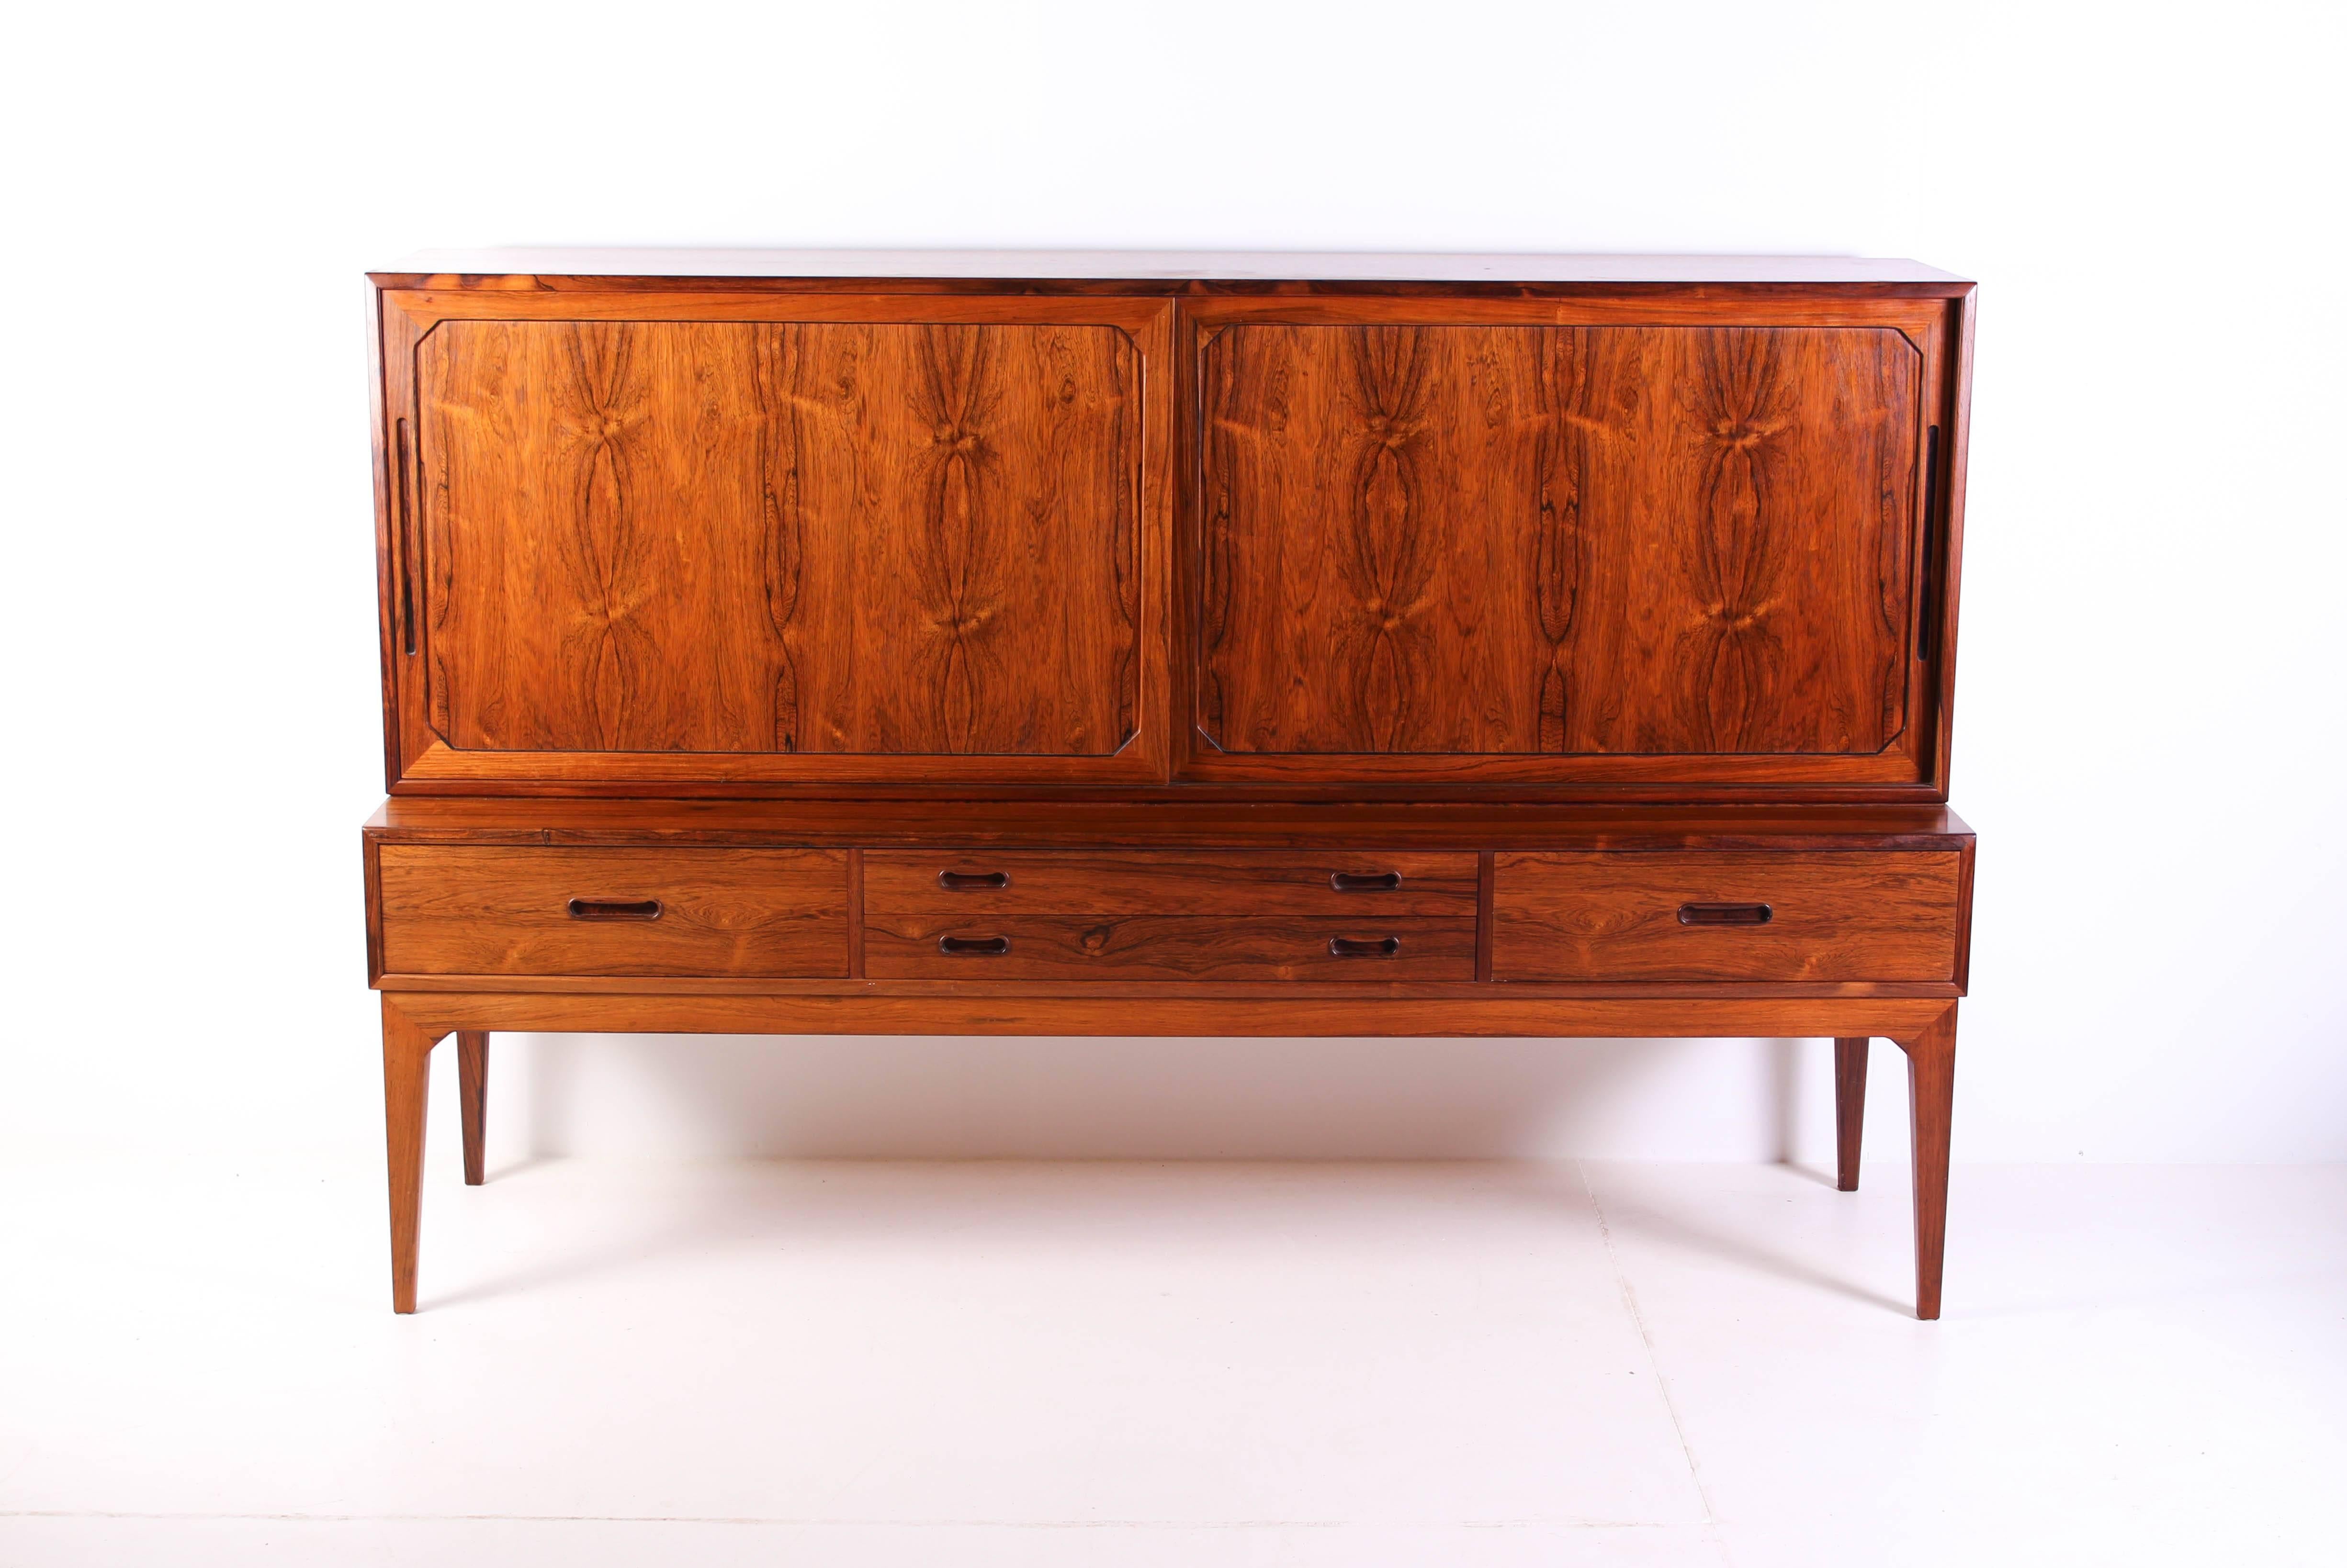 This rare sideboard by Danish manufacturer Severin Hansen is made out of rosewood and is in excellent vintage condition. This piece features several nice details and is made with great craftsmanship.